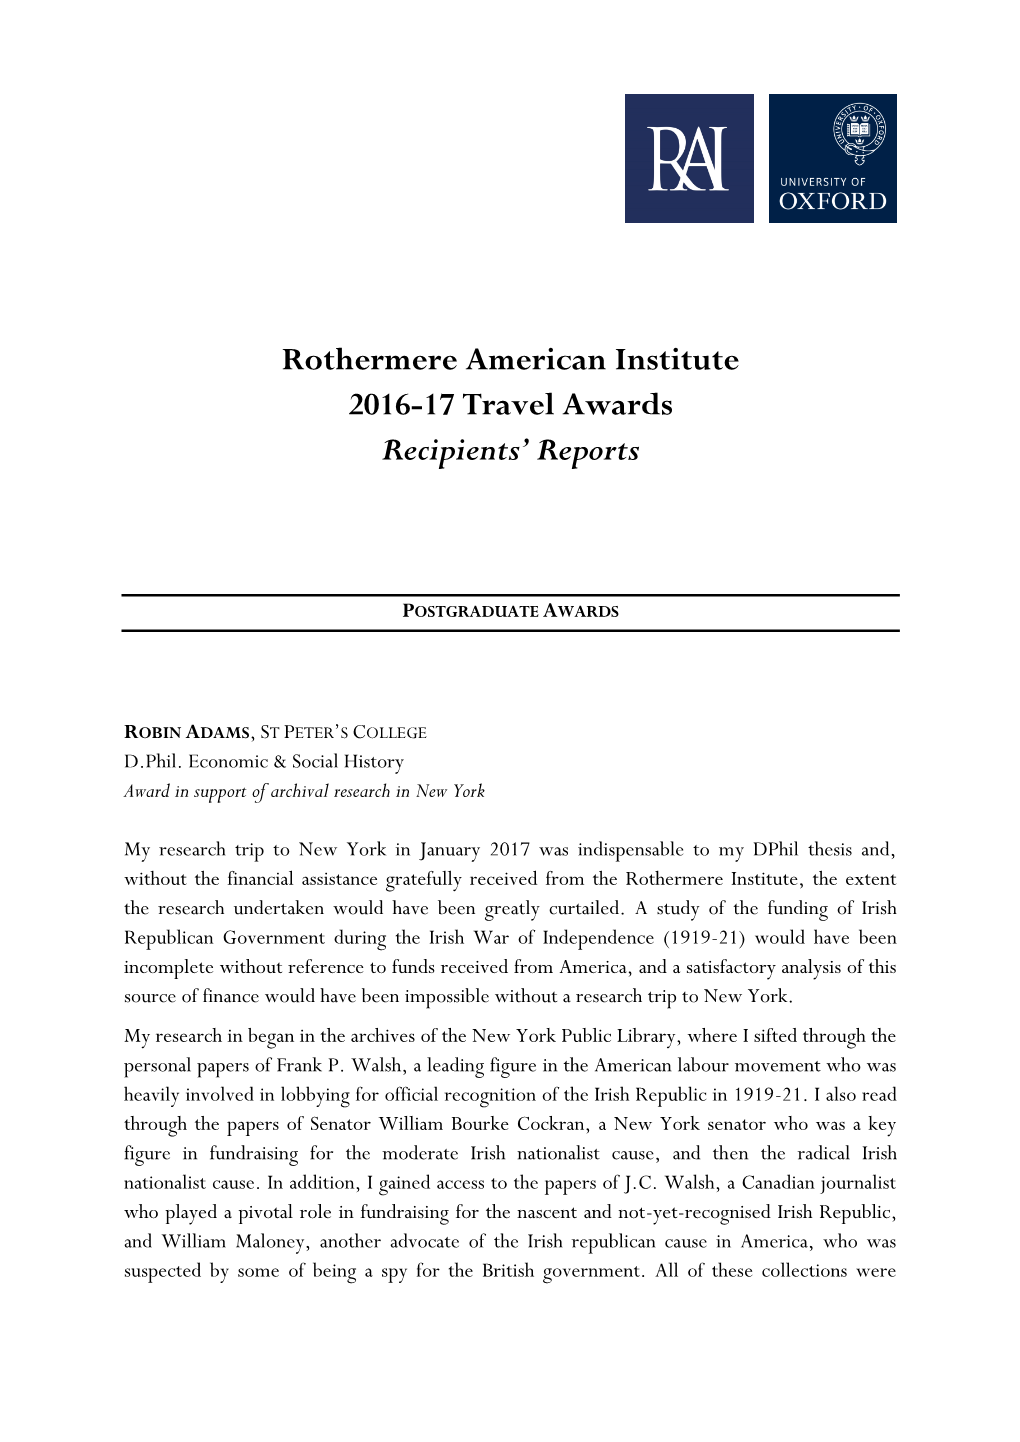 Rothermere American Institute 2016-17 Travel Awards Recipients’ Reports